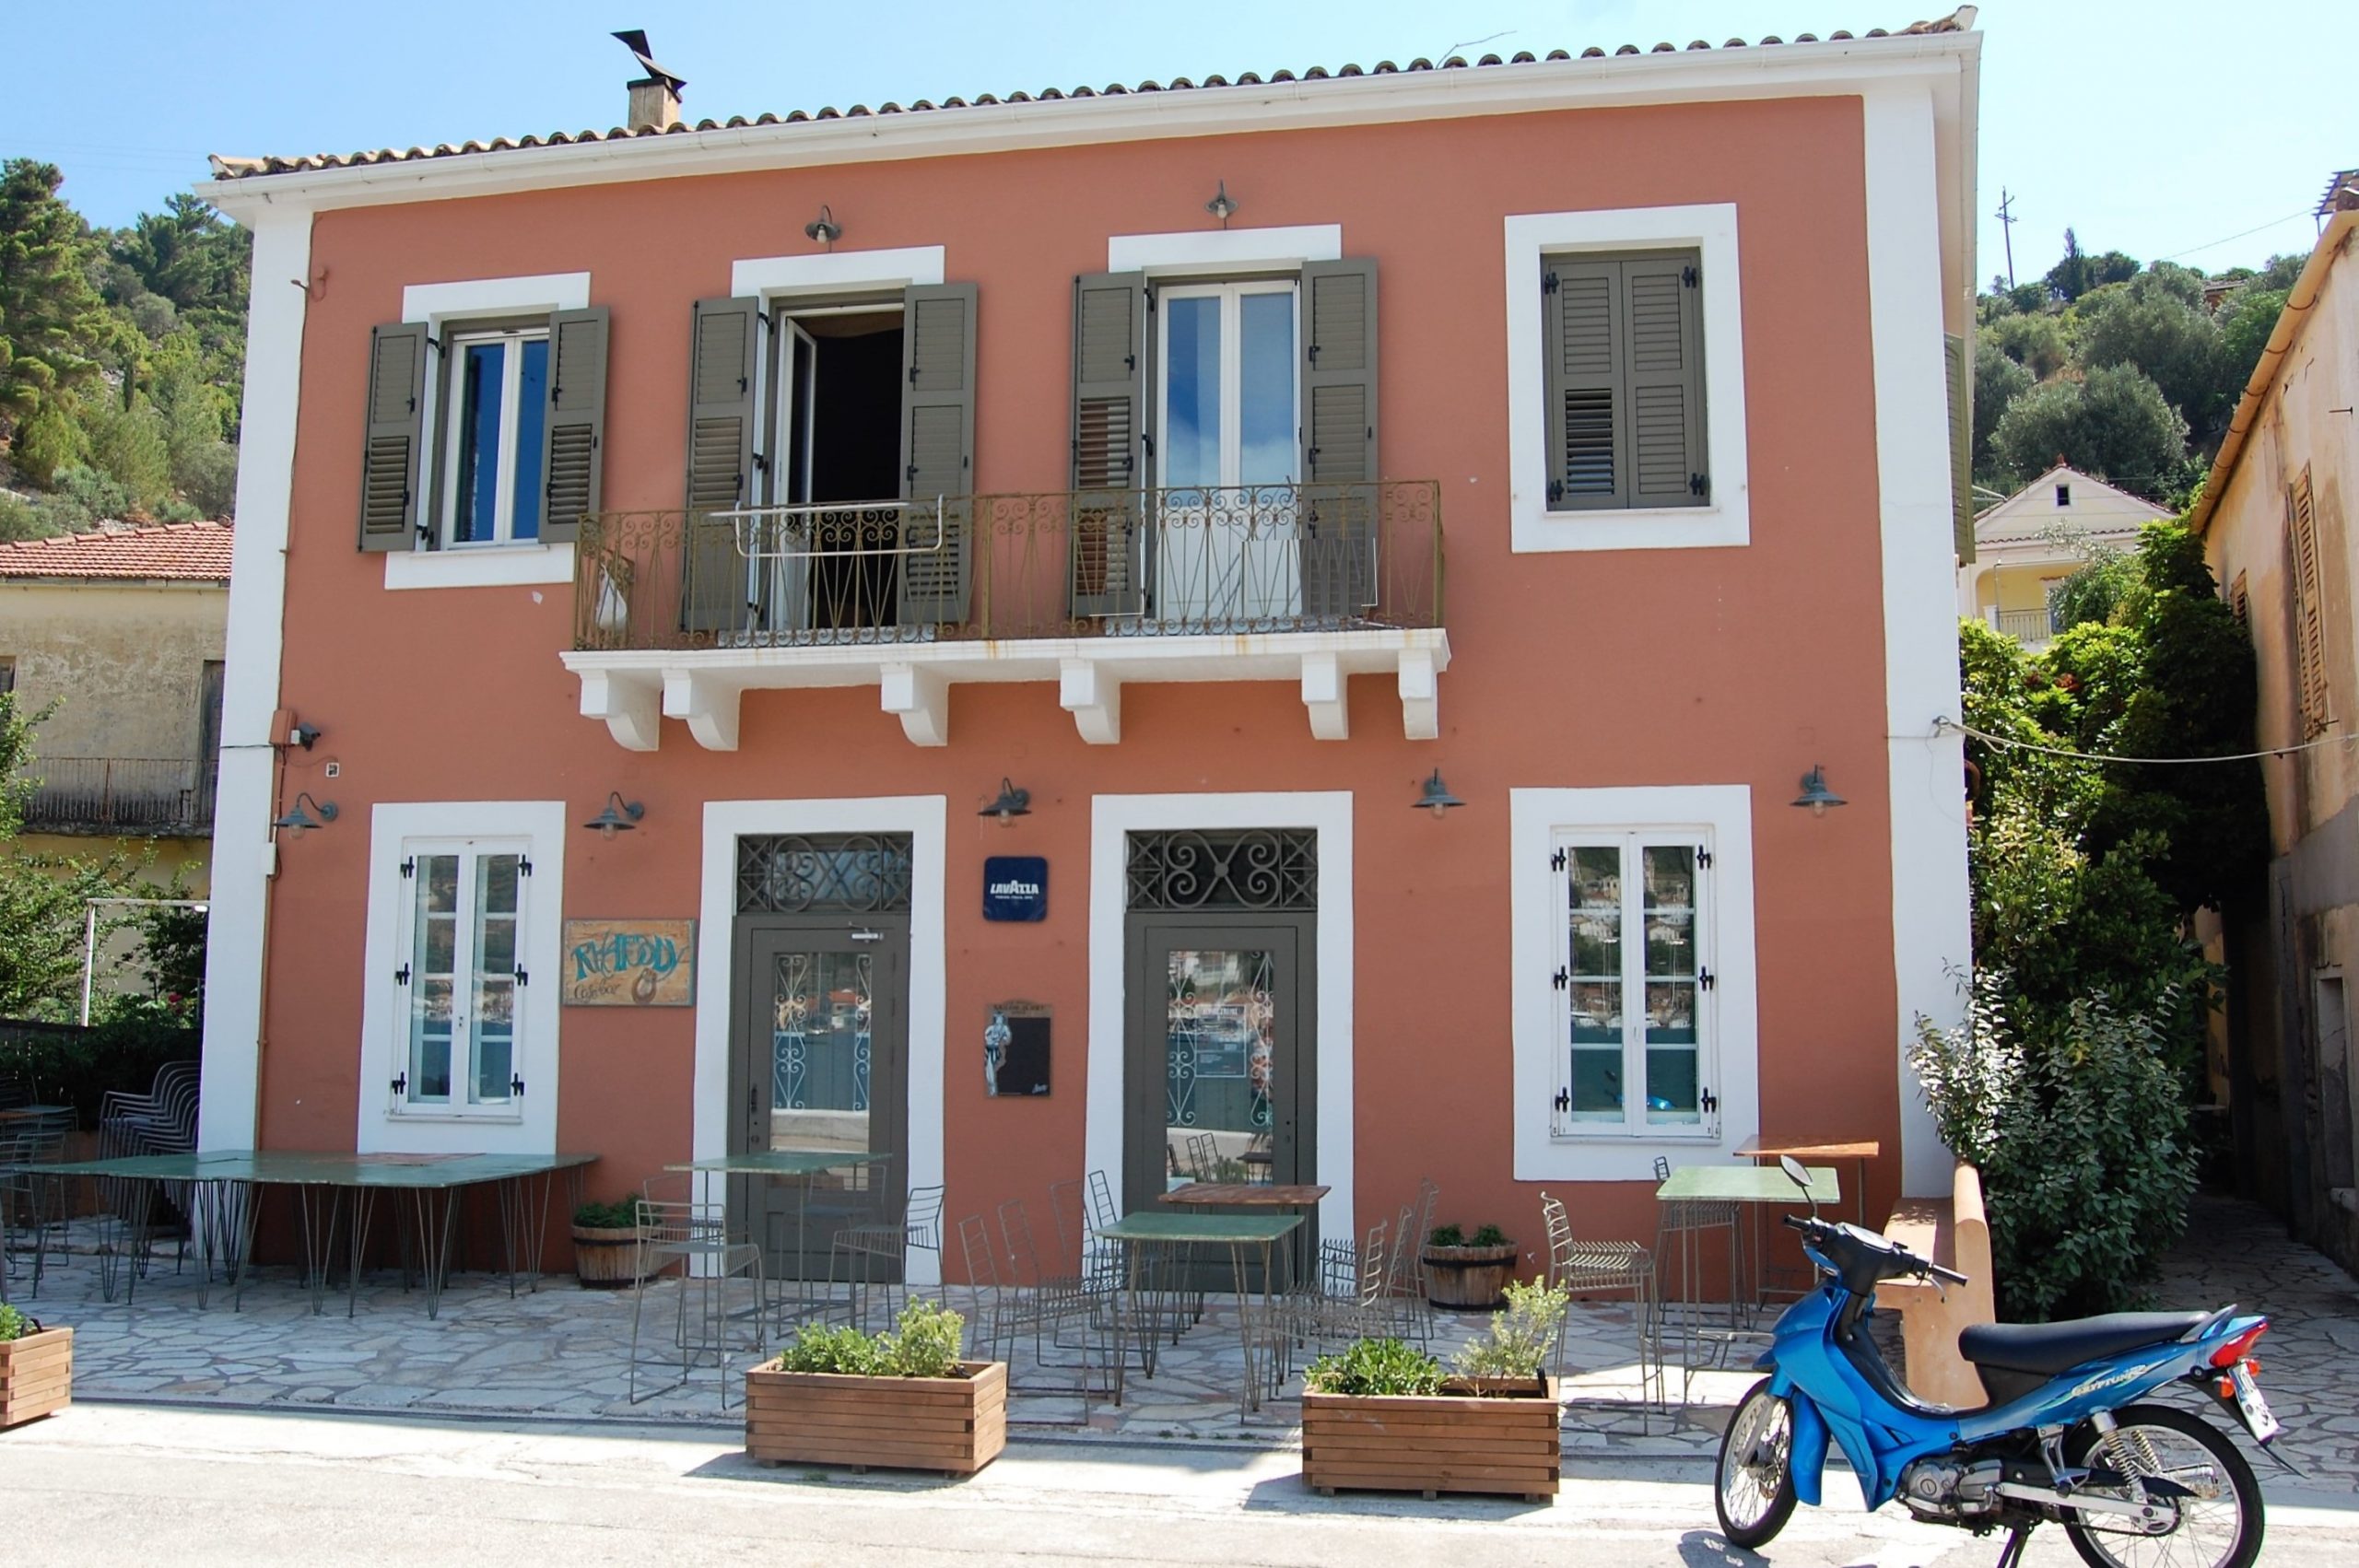 Exterior of bussiness for sale on Ithaca Greece, Vathi